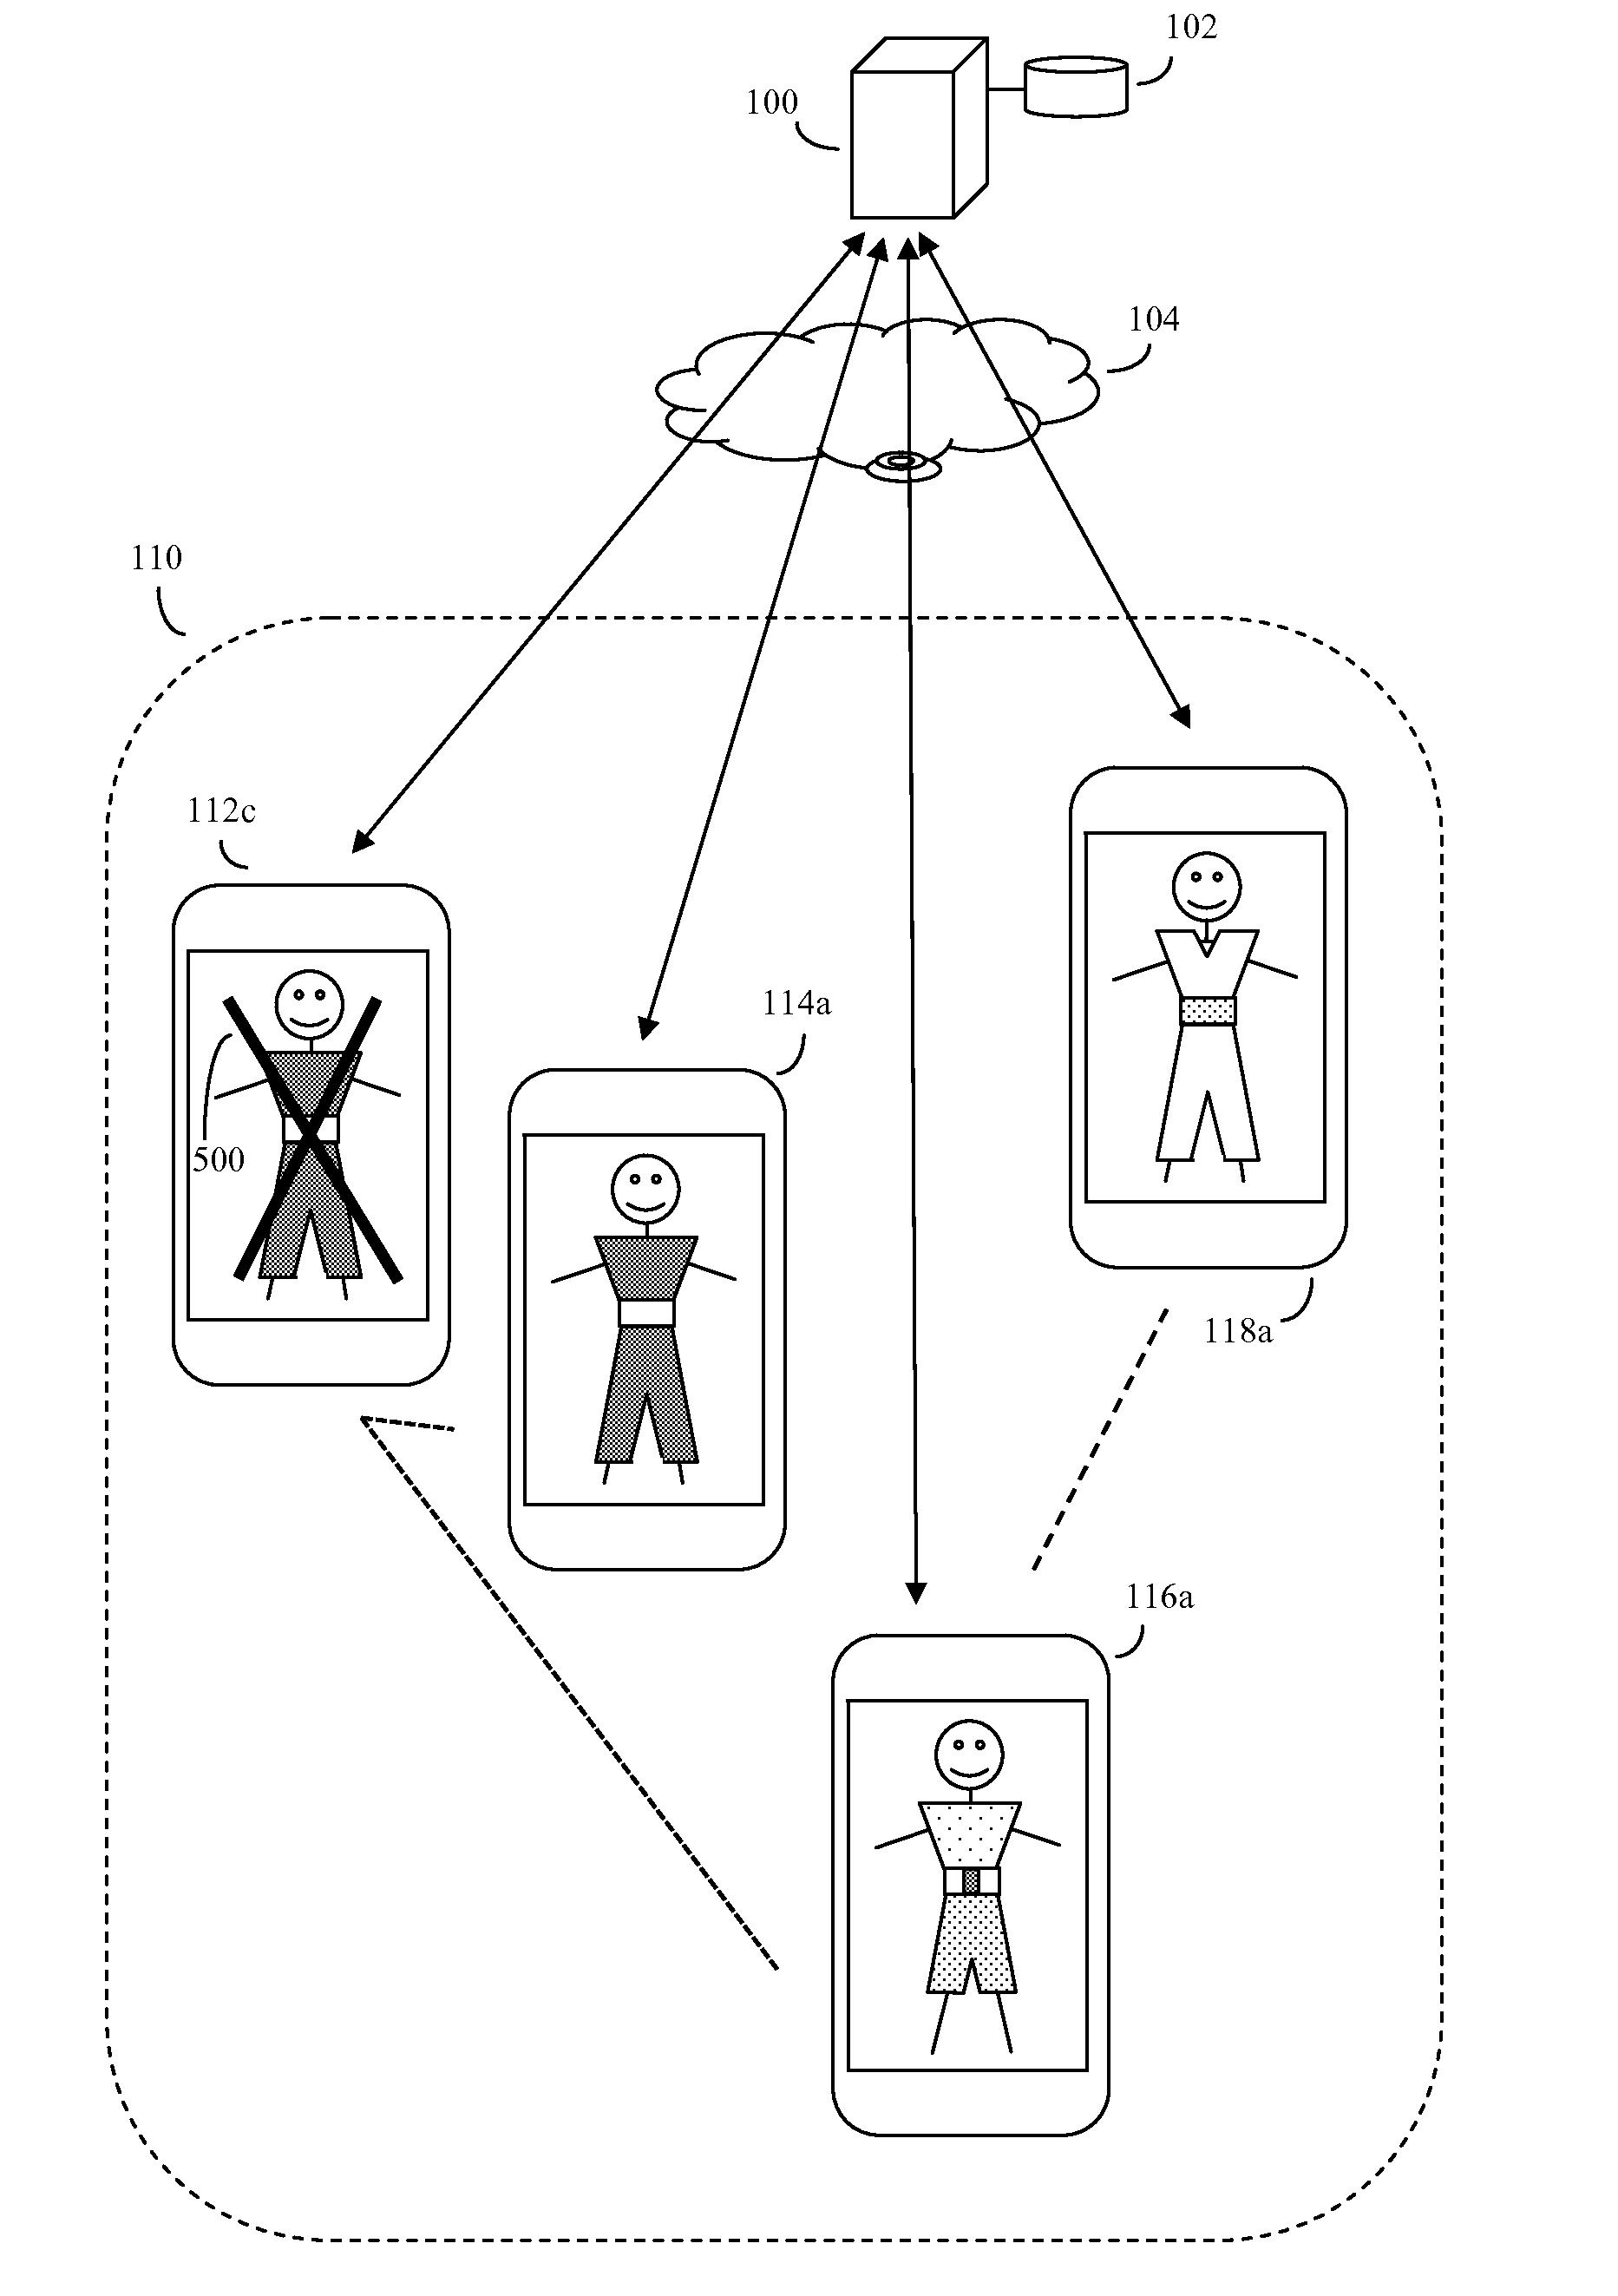 System and method for providing automated clothing fashion recommendations